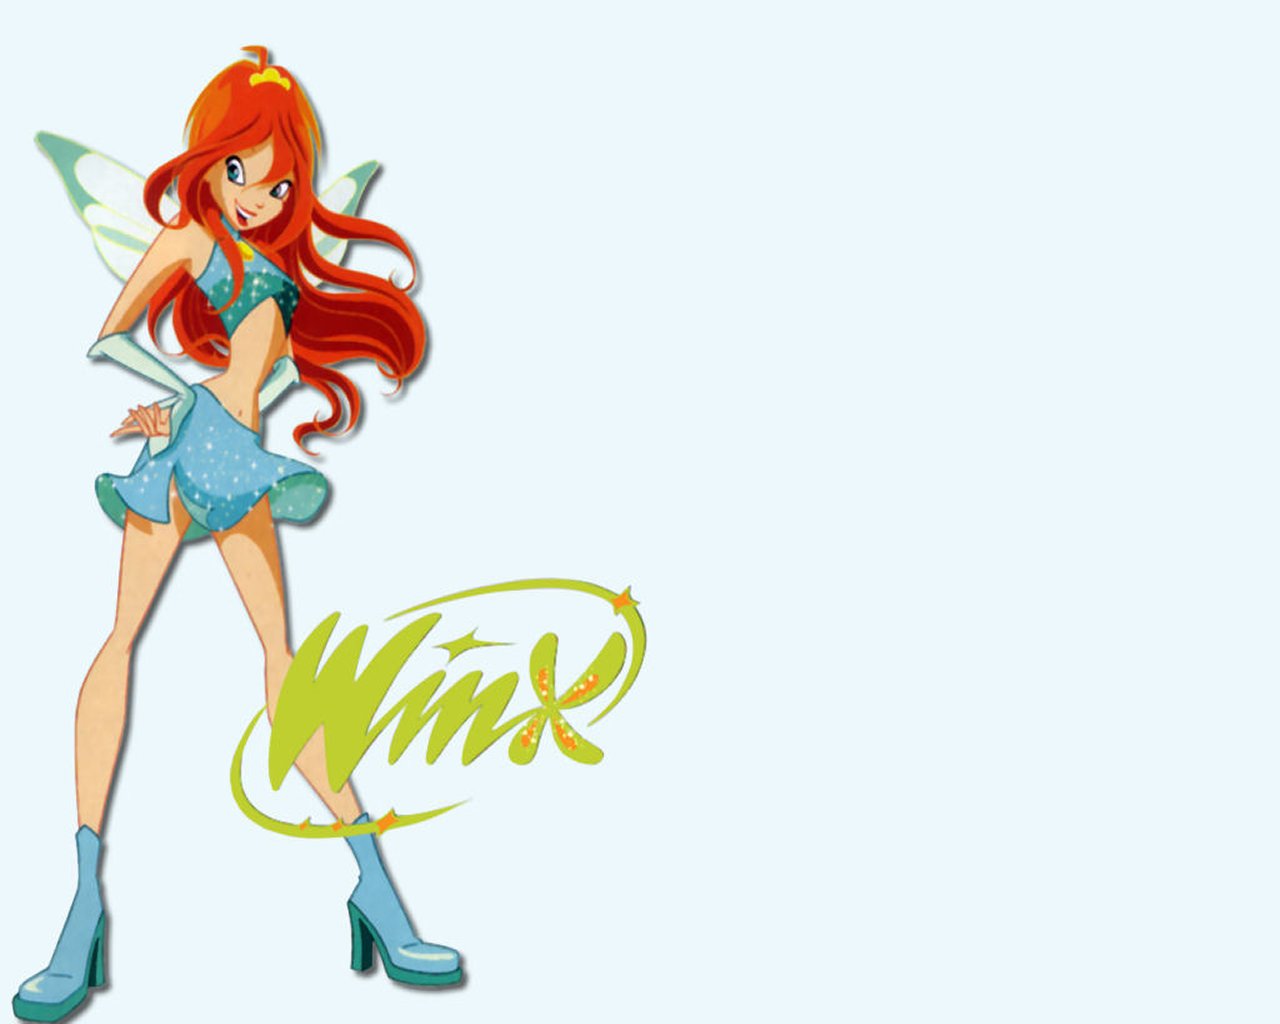 Wallpapers with winx club